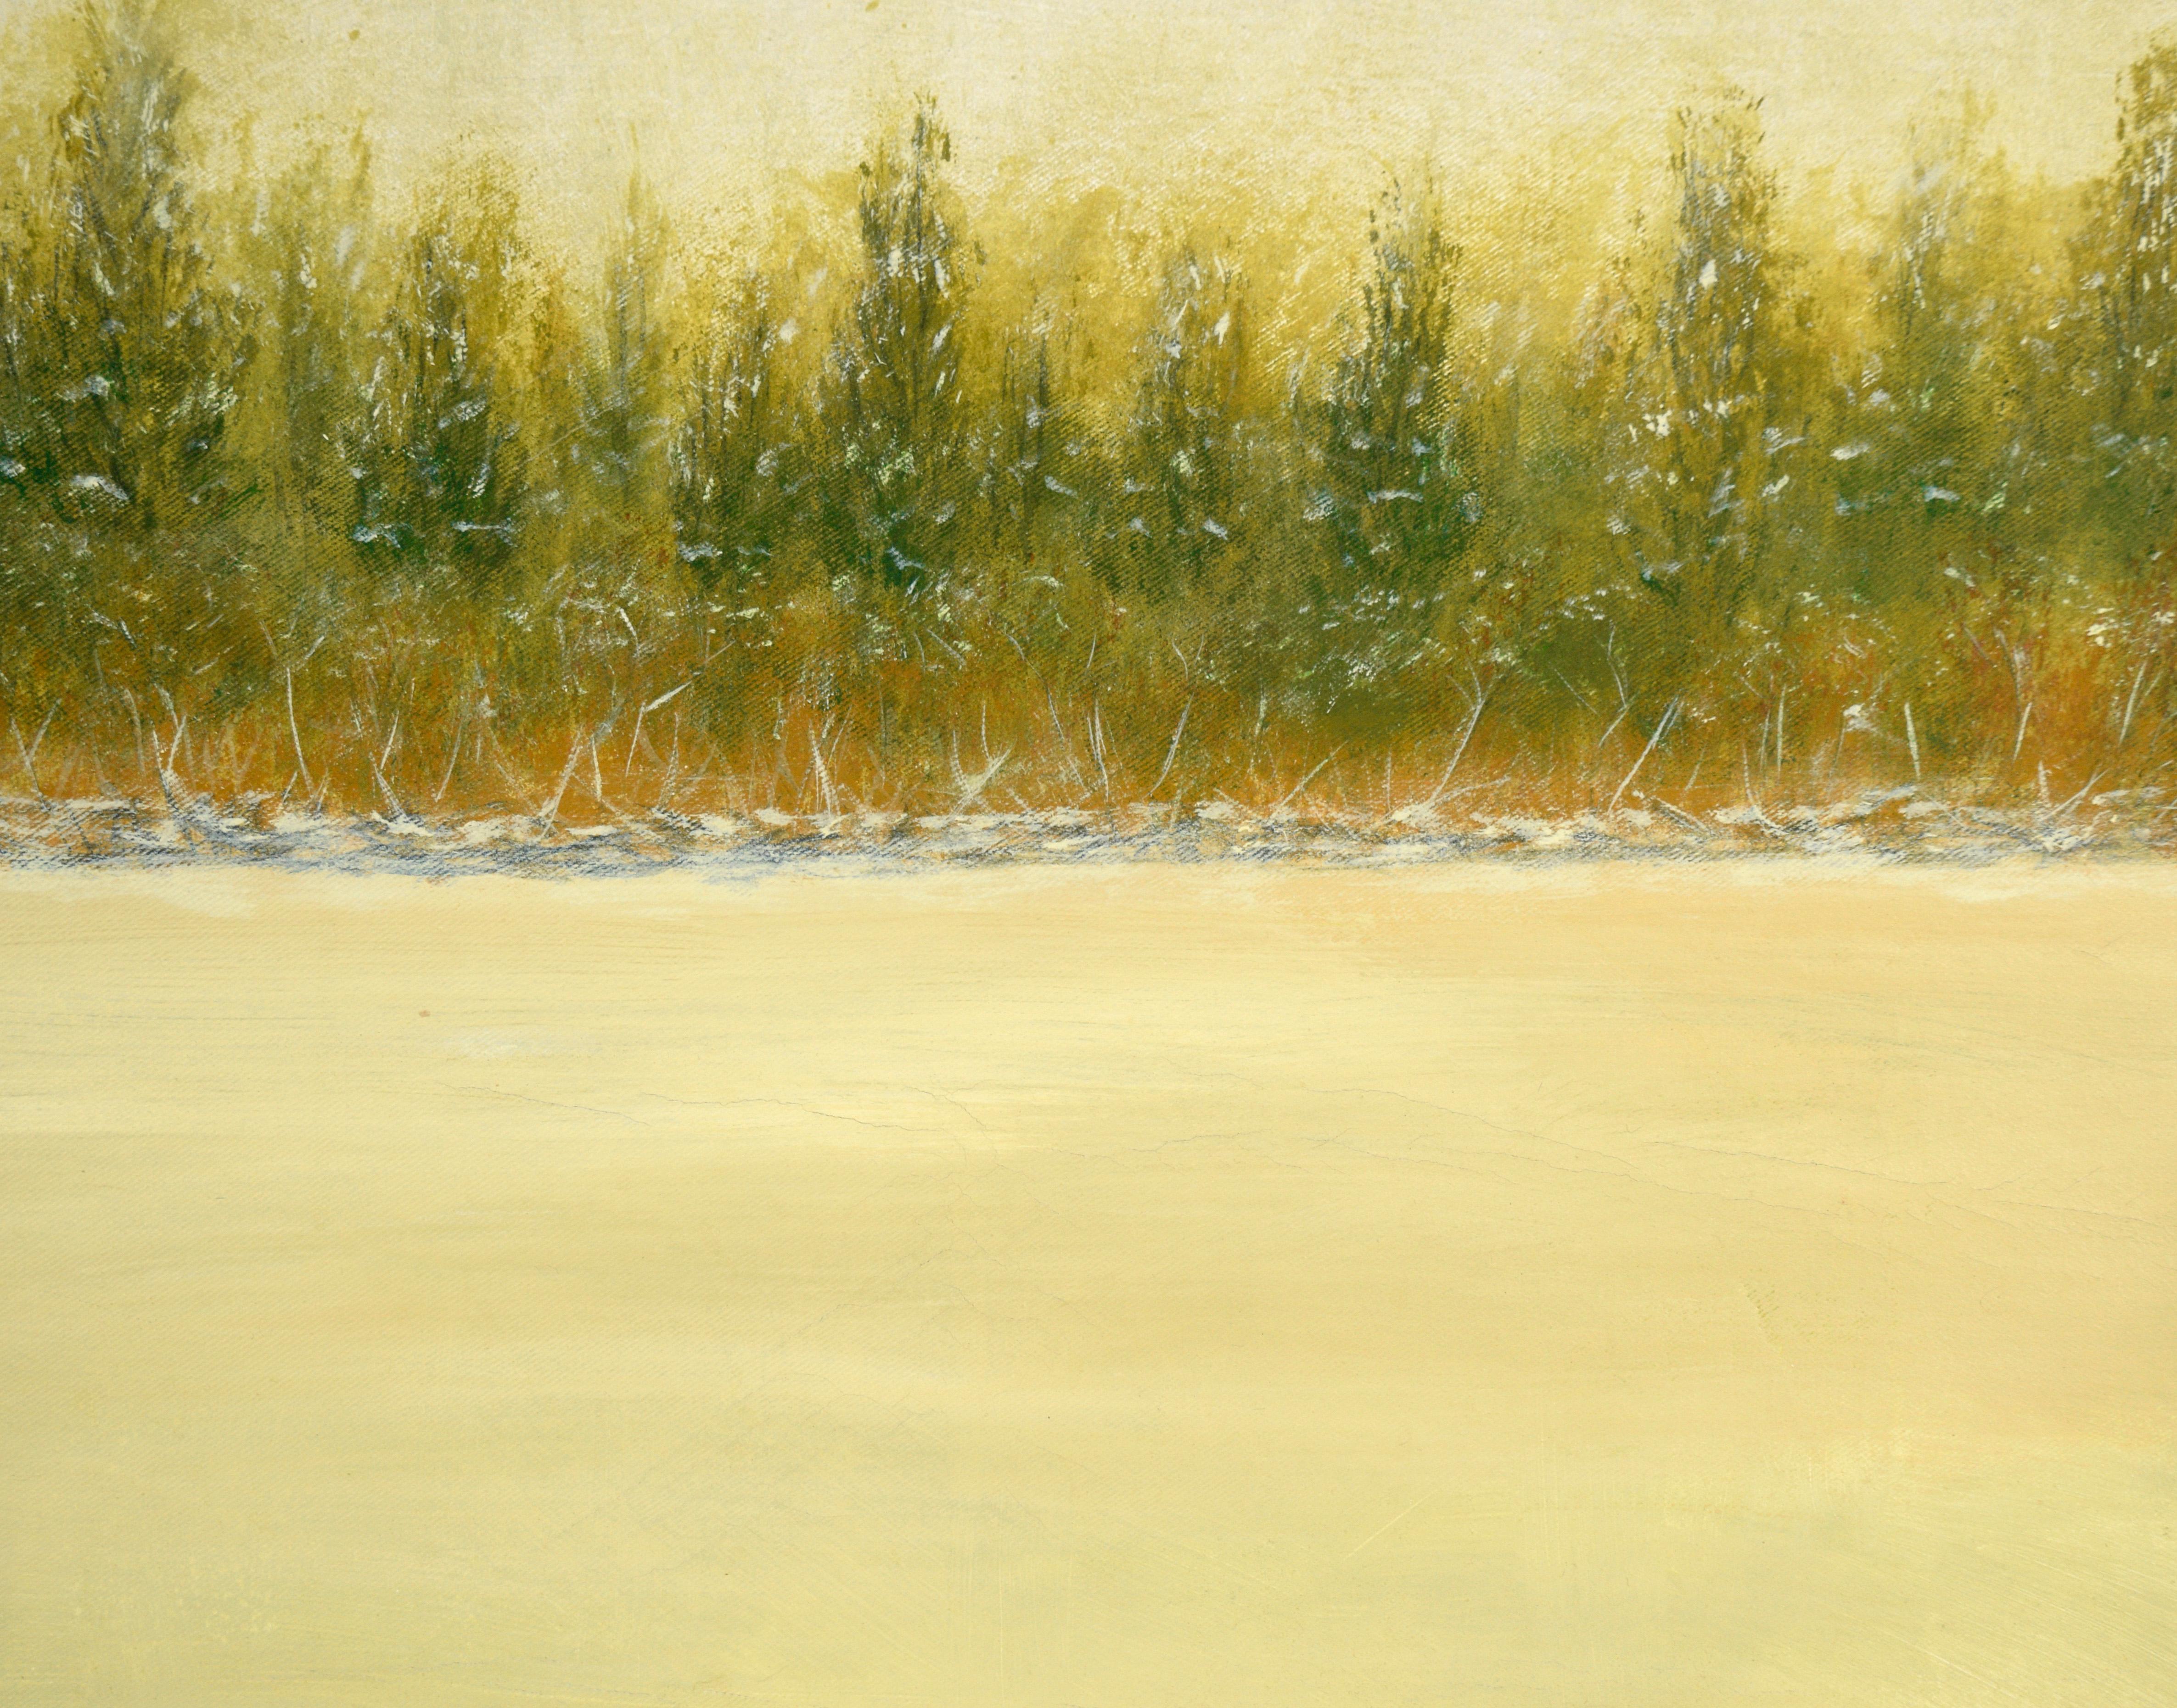 Across the Frozen Pond - Winter Landscape in Oil on Canvas

Winter landscape by Karen Evans (b. 1952). An off-white expanse of snow stretches out from the bottom edge of the canvas, terminating in a small ridge at the far side of the pond. There is